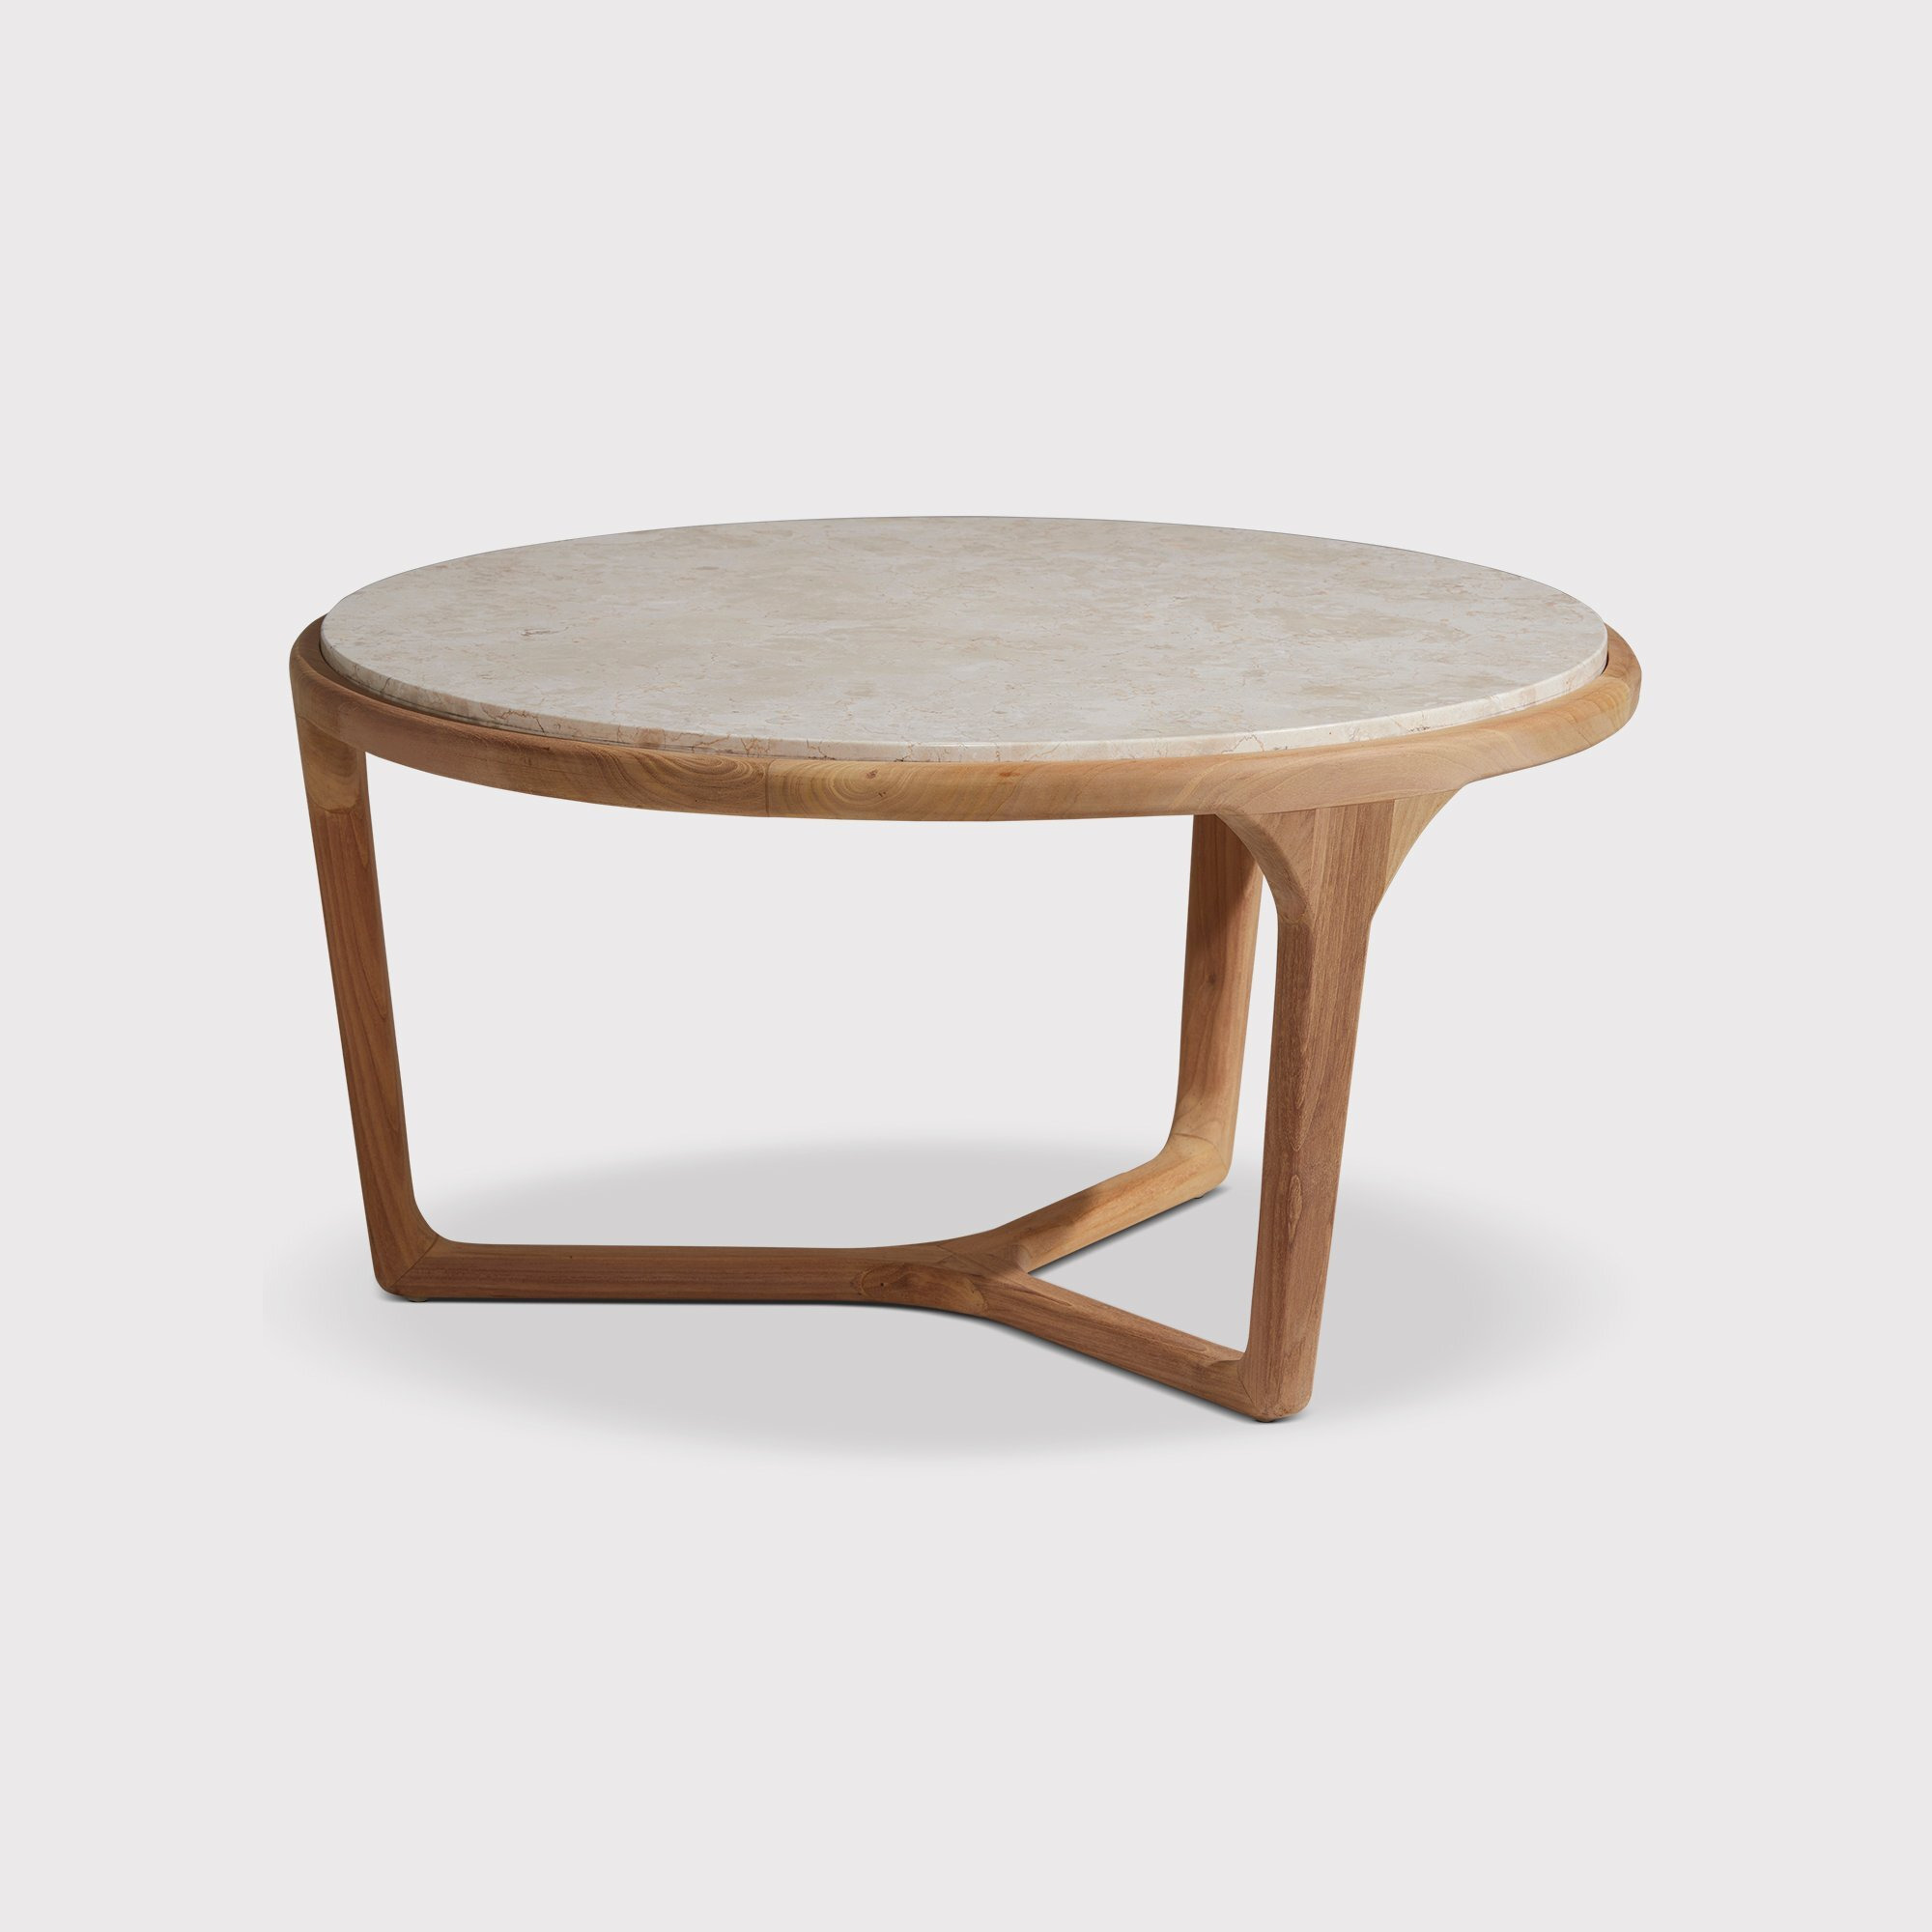 Terza Coffee Table, Round, Teak Wood - Barker & Stonehouse - image 1